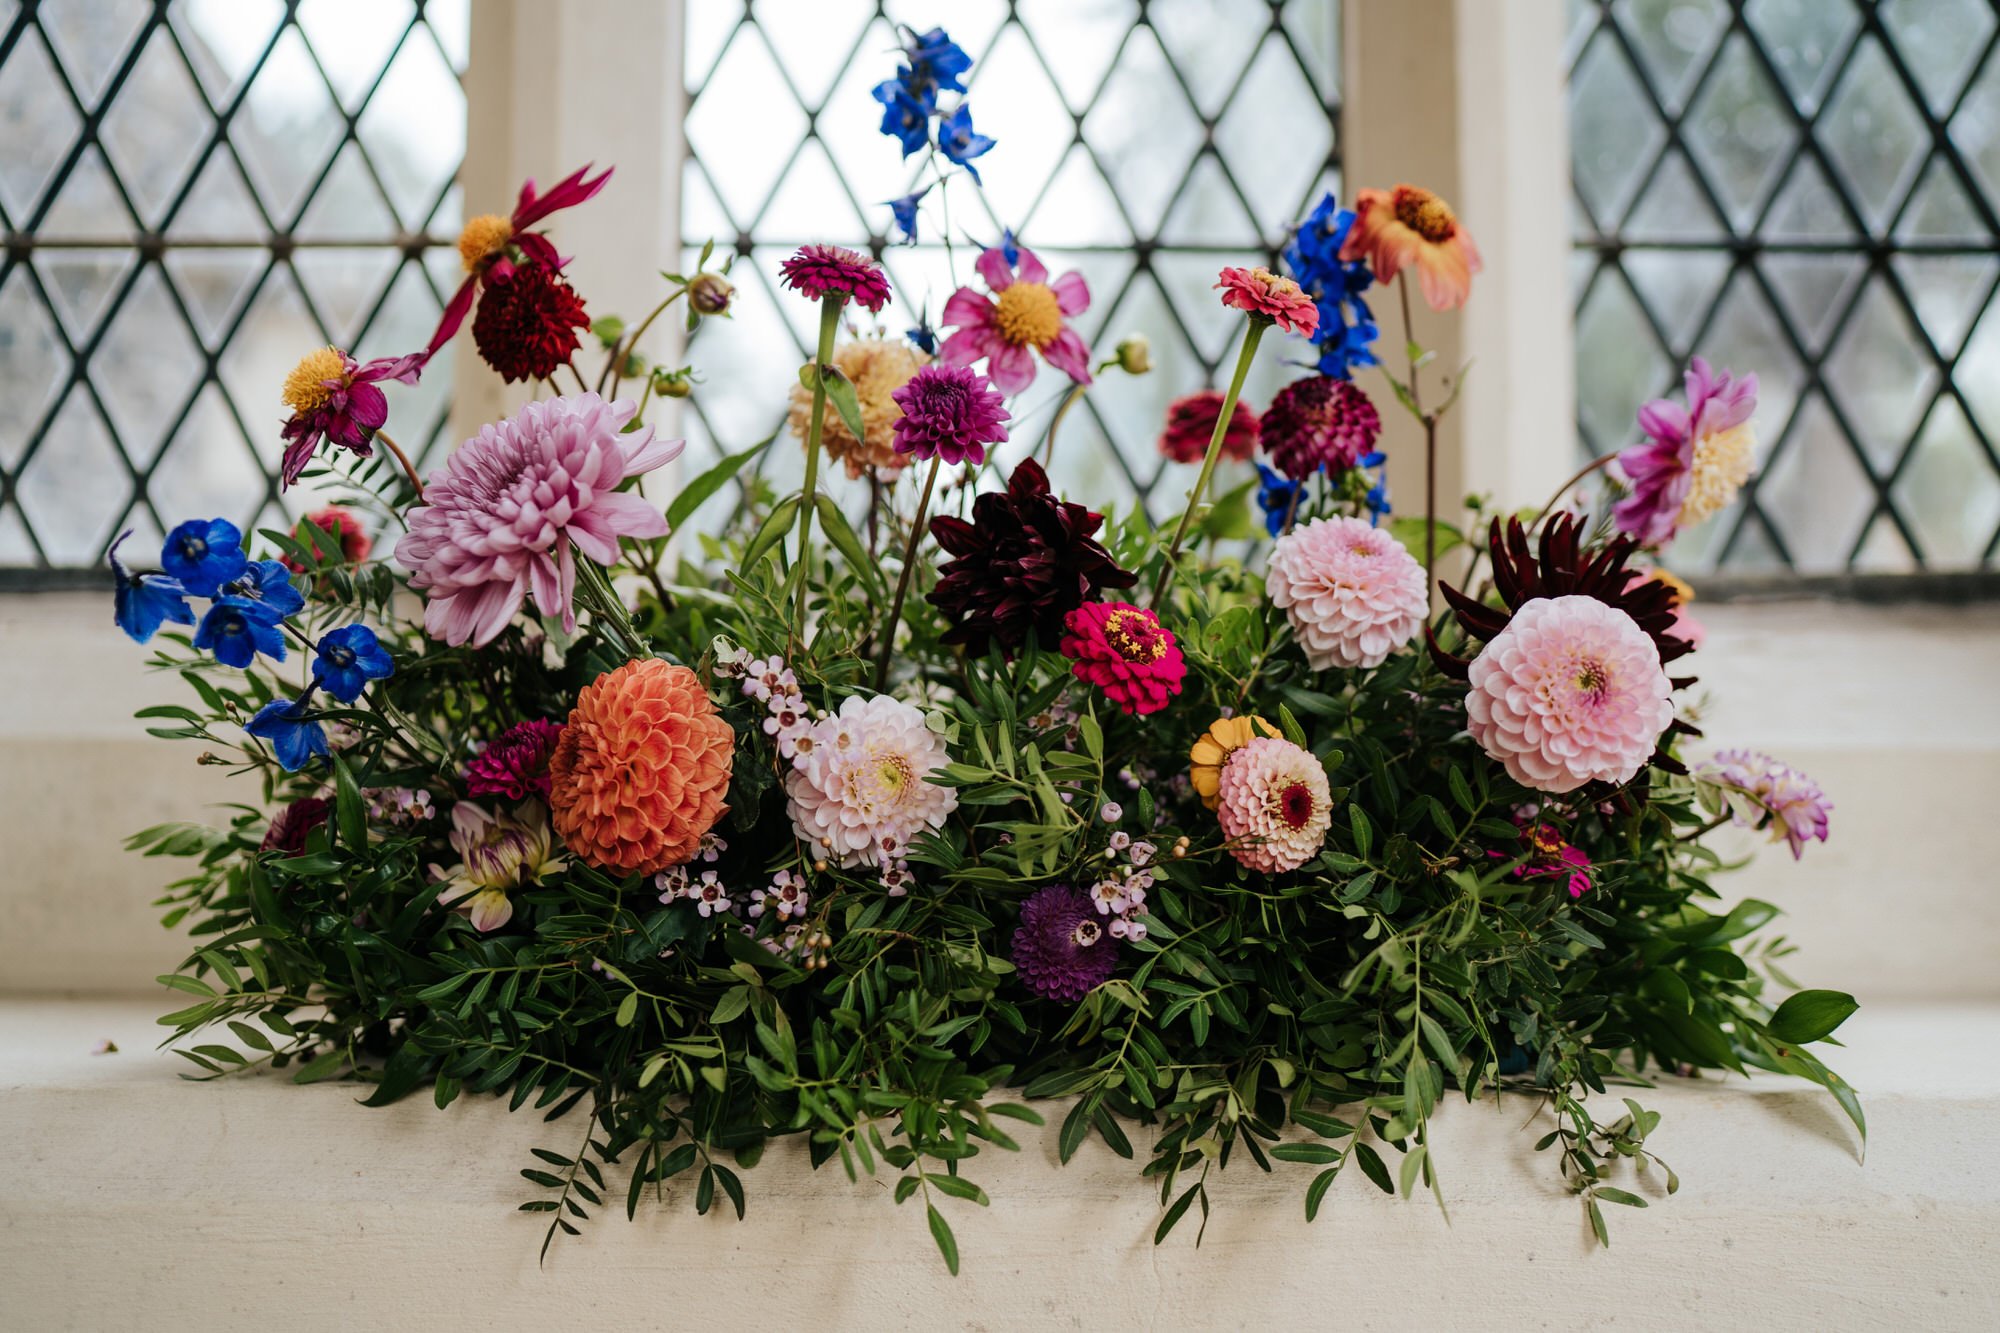 Beautifully colourful red and blue flowers used as decoration during wedding in Woodbridge